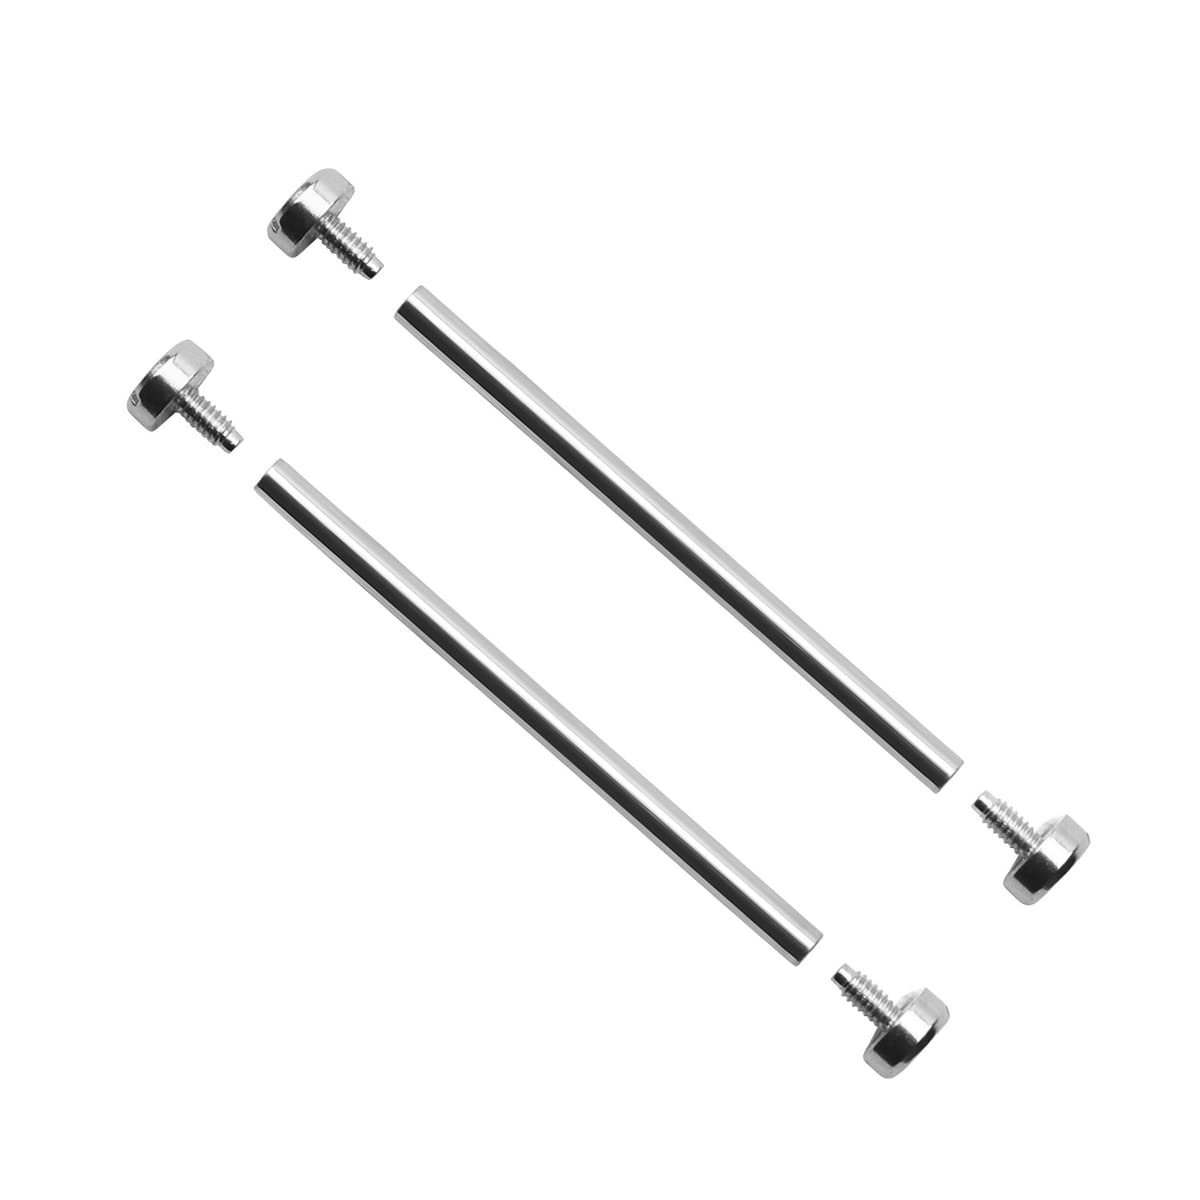 Ewatchparts SCREW PIN BAR ROD TUBE COMPATIBLE WITH NIXON 51-30 WATCH LUG STRAP BAND KIT S/STEEL SILVER